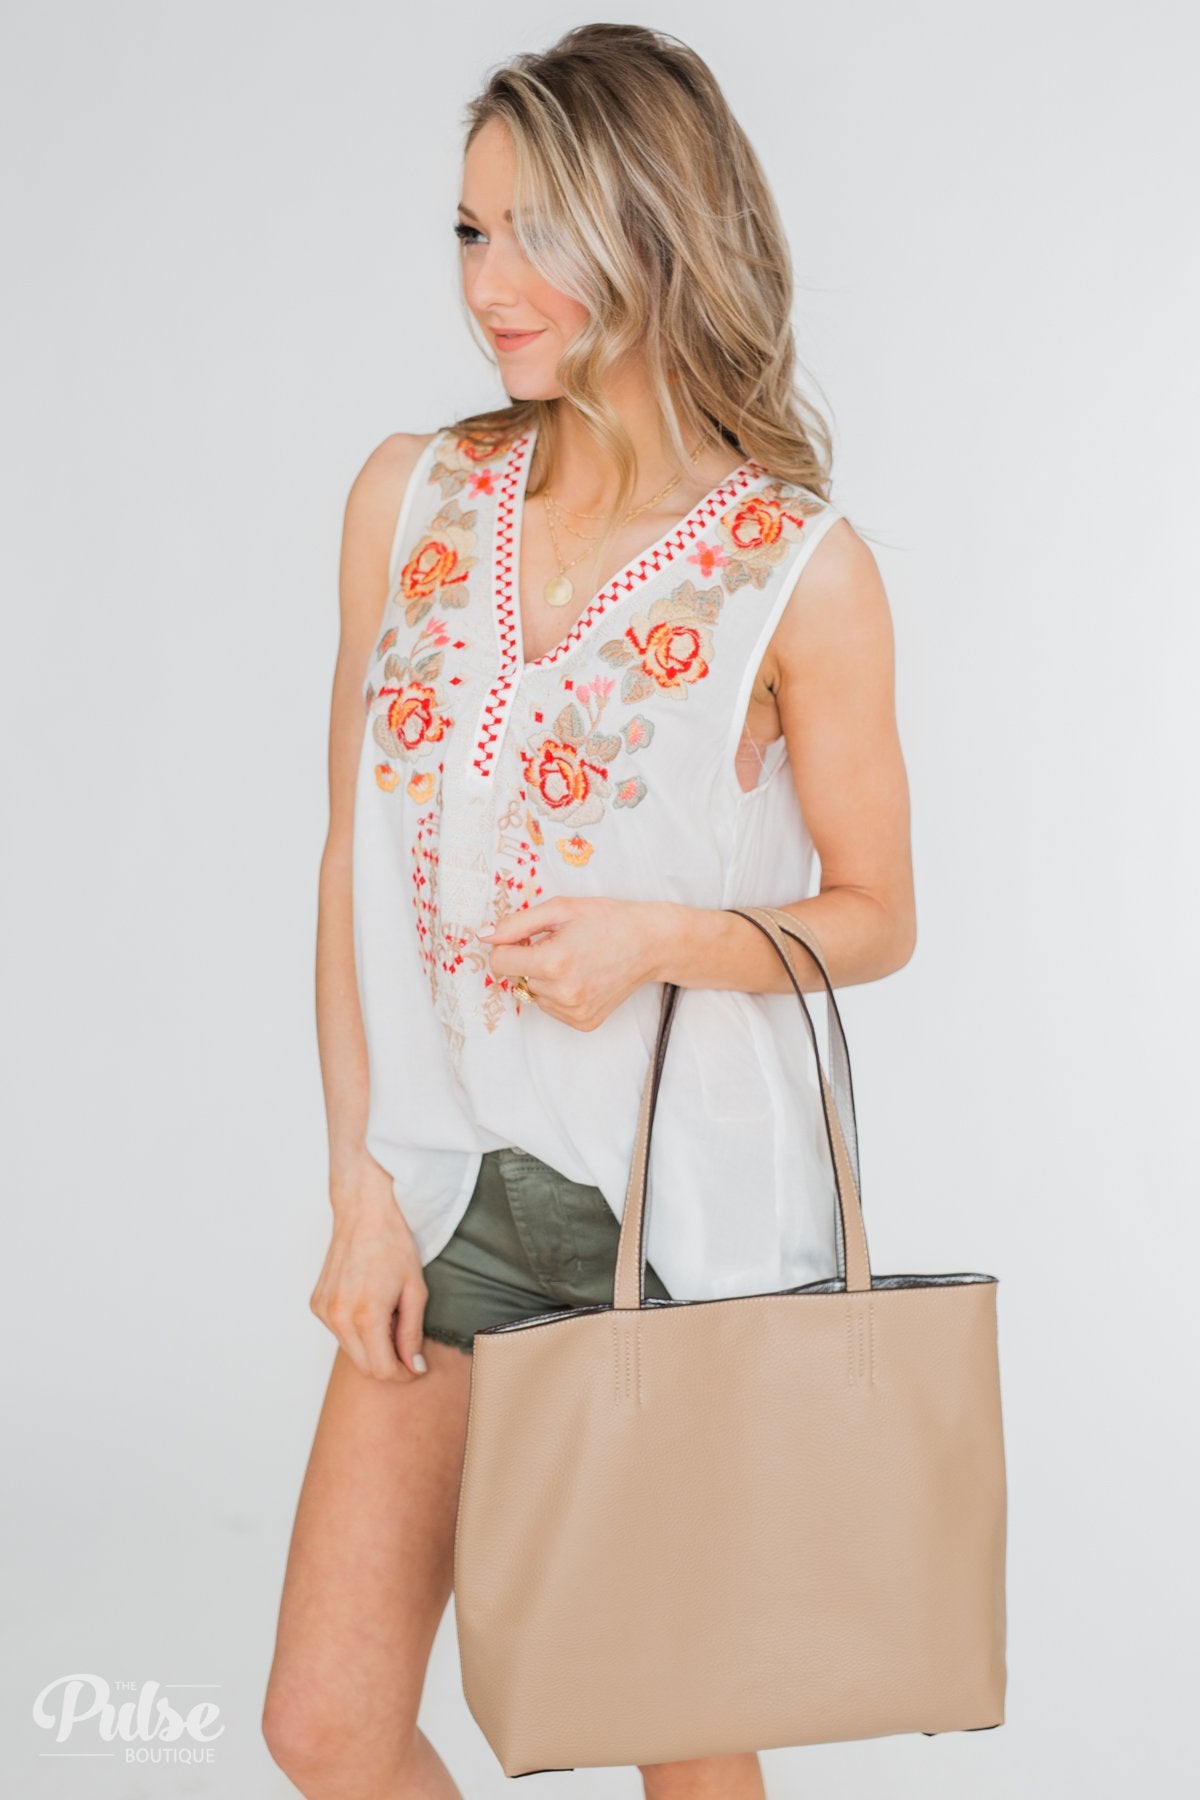 Take Me Anywhere Reversible Tote - Light Beige/Silver